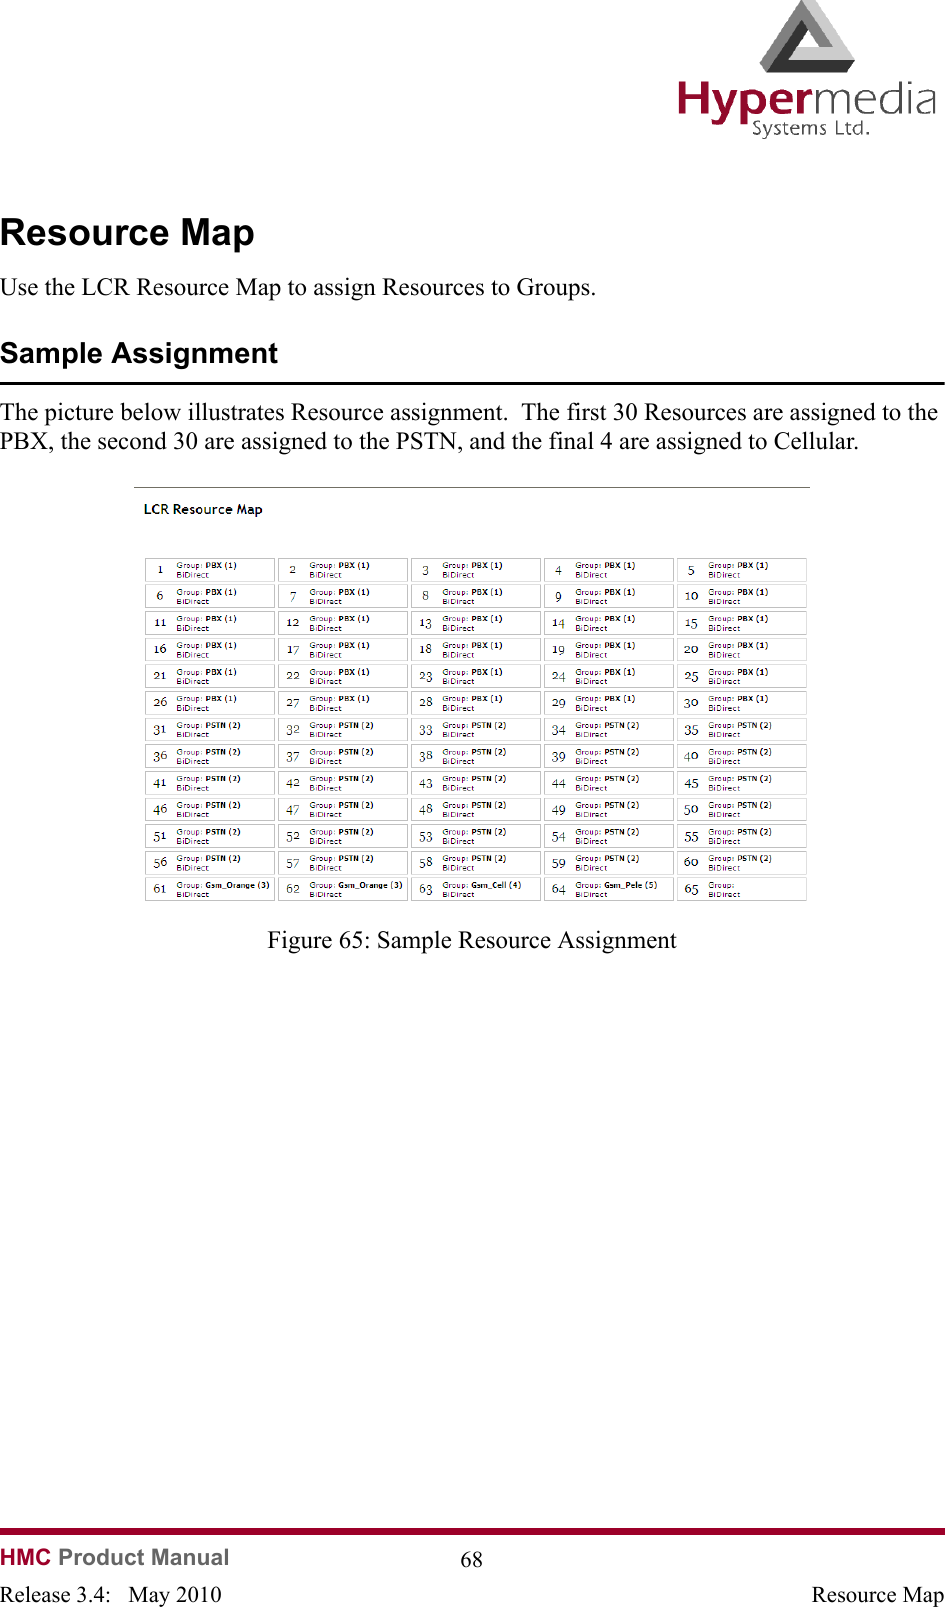   HMC Product Manual  68Release 3.4:   May 2010 Resource MapResource MapUse the LCR Resource Map to assign Resources to Groups.Sample AssignmentThe picture below illustrates Resource assignment.  The first 30 Resources are assigned to the PBX, the second 30 are assigned to the PSTN, and the final 4 are assigned to Cellular.              Figure 65: Sample Resource Assignment